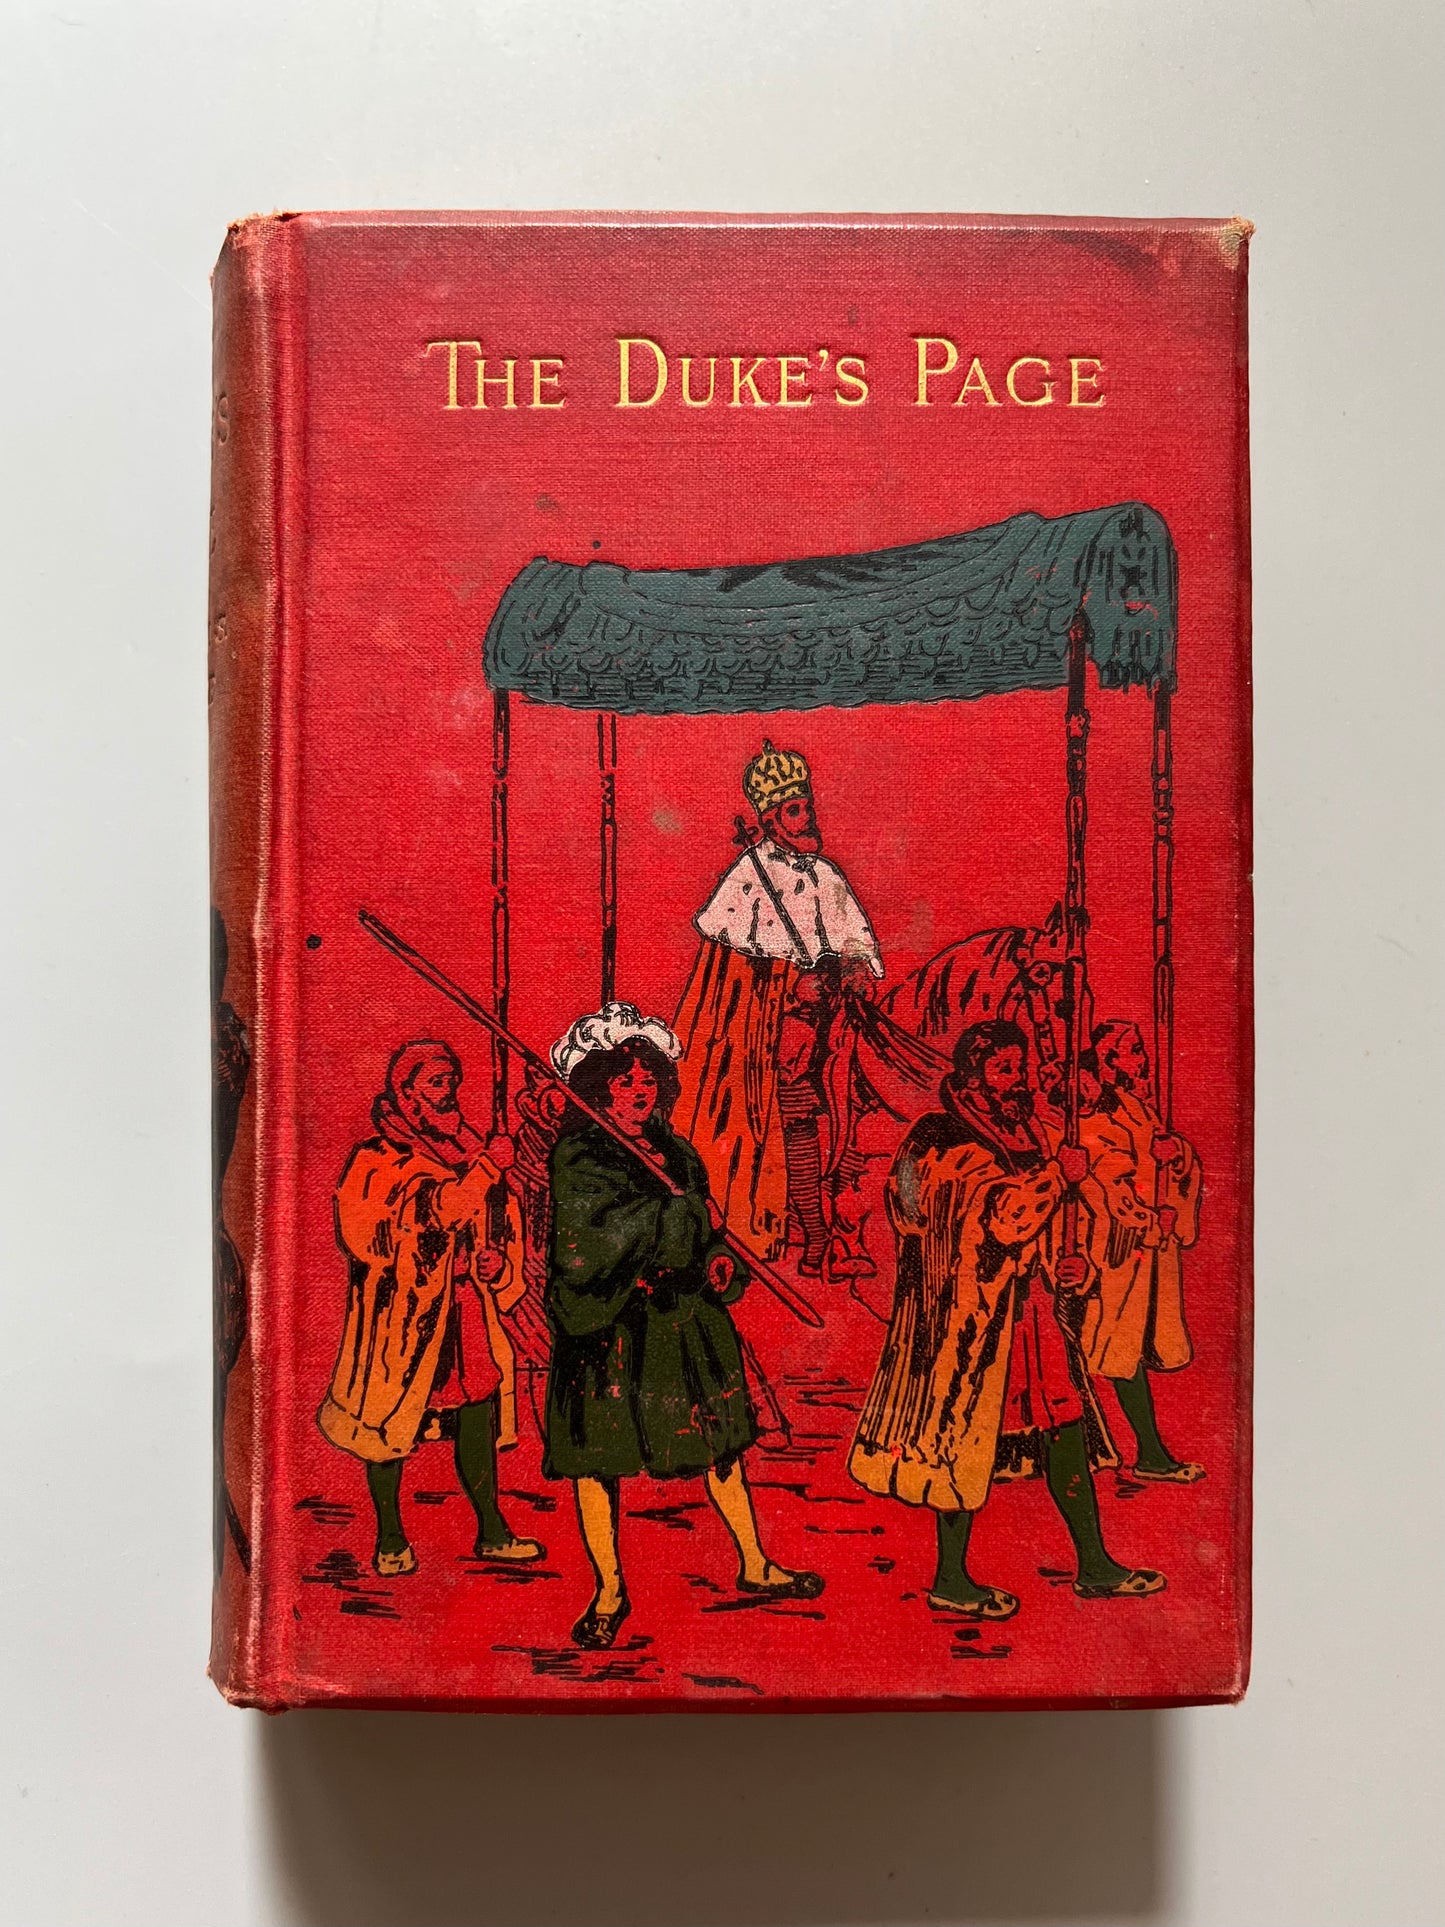 The Dukes page or In the days of Luther, Sarah M. S. Clarke - James Nisbet & Co, ca. 1900